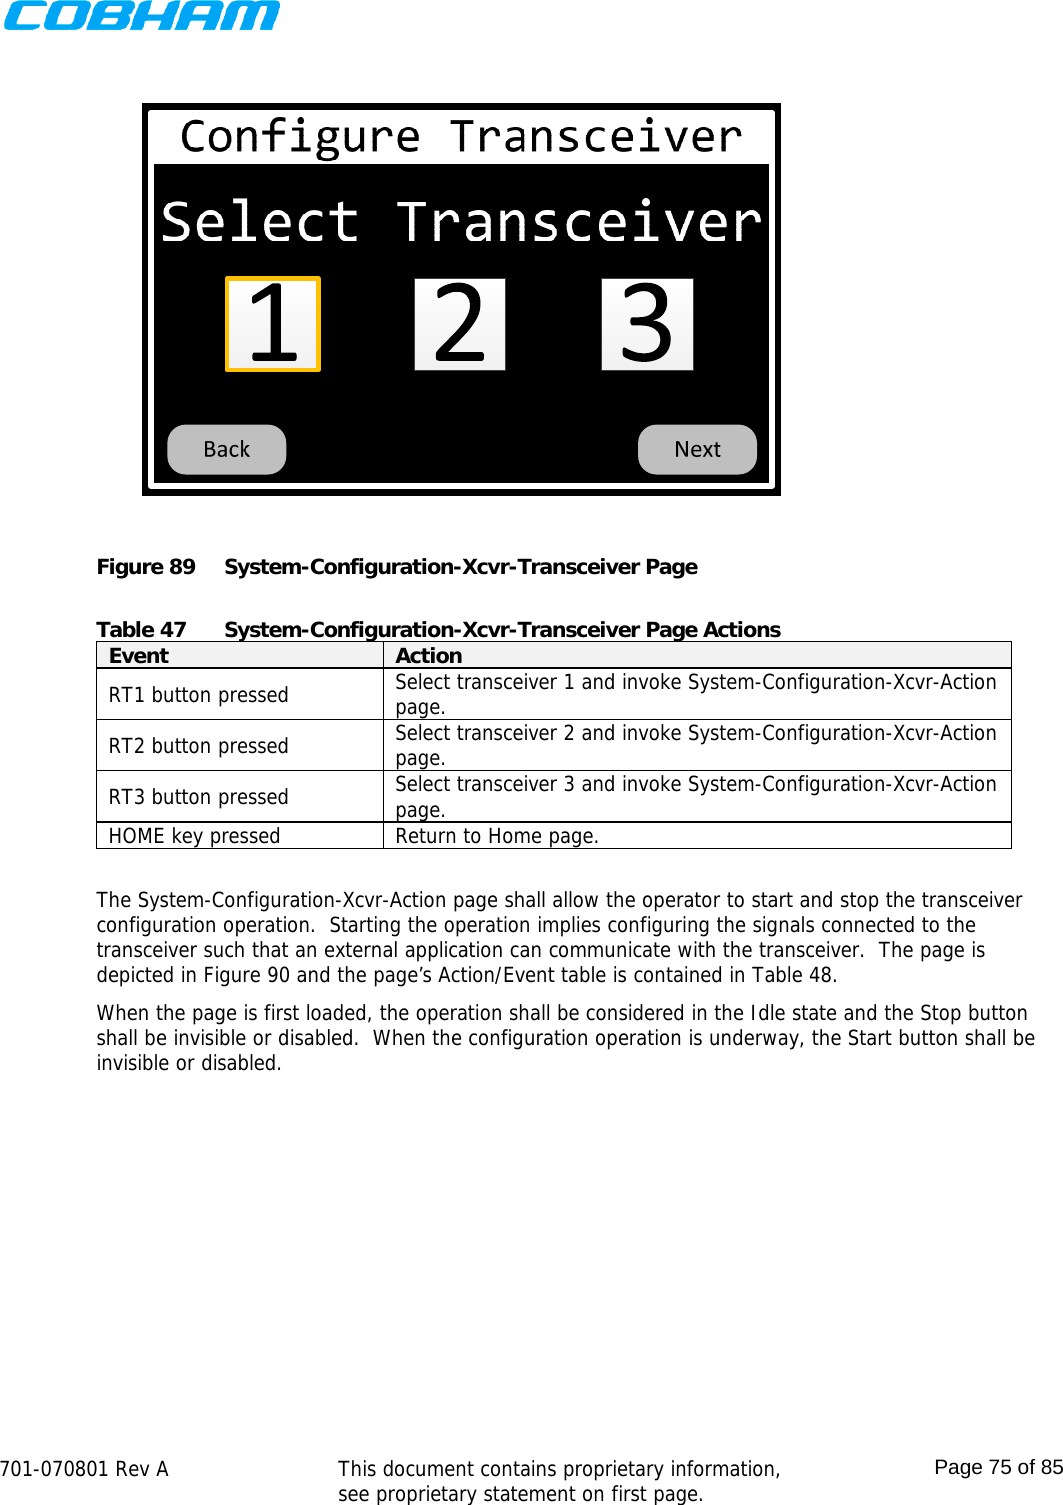    701-070801 Rev A   This document contains proprietary information, see proprietary statement on first page.  Page 75 of 85   Figure 89  System-Configuration-Xcvr-Transceiver Page  Table 47  System-Configuration-Xcvr-Transceiver Page Actions Event  Action RT1 button pressed  Select transceiver 1 and invoke System-Configuration-Xcvr-Action page. RT2 button pressed  Select transceiver 2 and invoke System-Configuration-Xcvr-Action page. RT3 button pressed  Select transceiver 3 and invoke System-Configuration-Xcvr-Action page. HOME key pressed  Return to Home page.  The System-Configuration-Xcvr-Action page shall allow the operator to start and stop the transceiver configuration operation.  Starting the operation implies configuring the signals connected to the transceiver such that an external application can communicate with the transceiver.  The page is depicted in Figure 90 and the page’s Action/Event table is contained in Table 48. When the page is first loaded, the operation shall be considered in the Idle state and the Stop button shall be invisible or disabled.  When the configuration operation is underway, the Start button shall be invisible or disabled. 